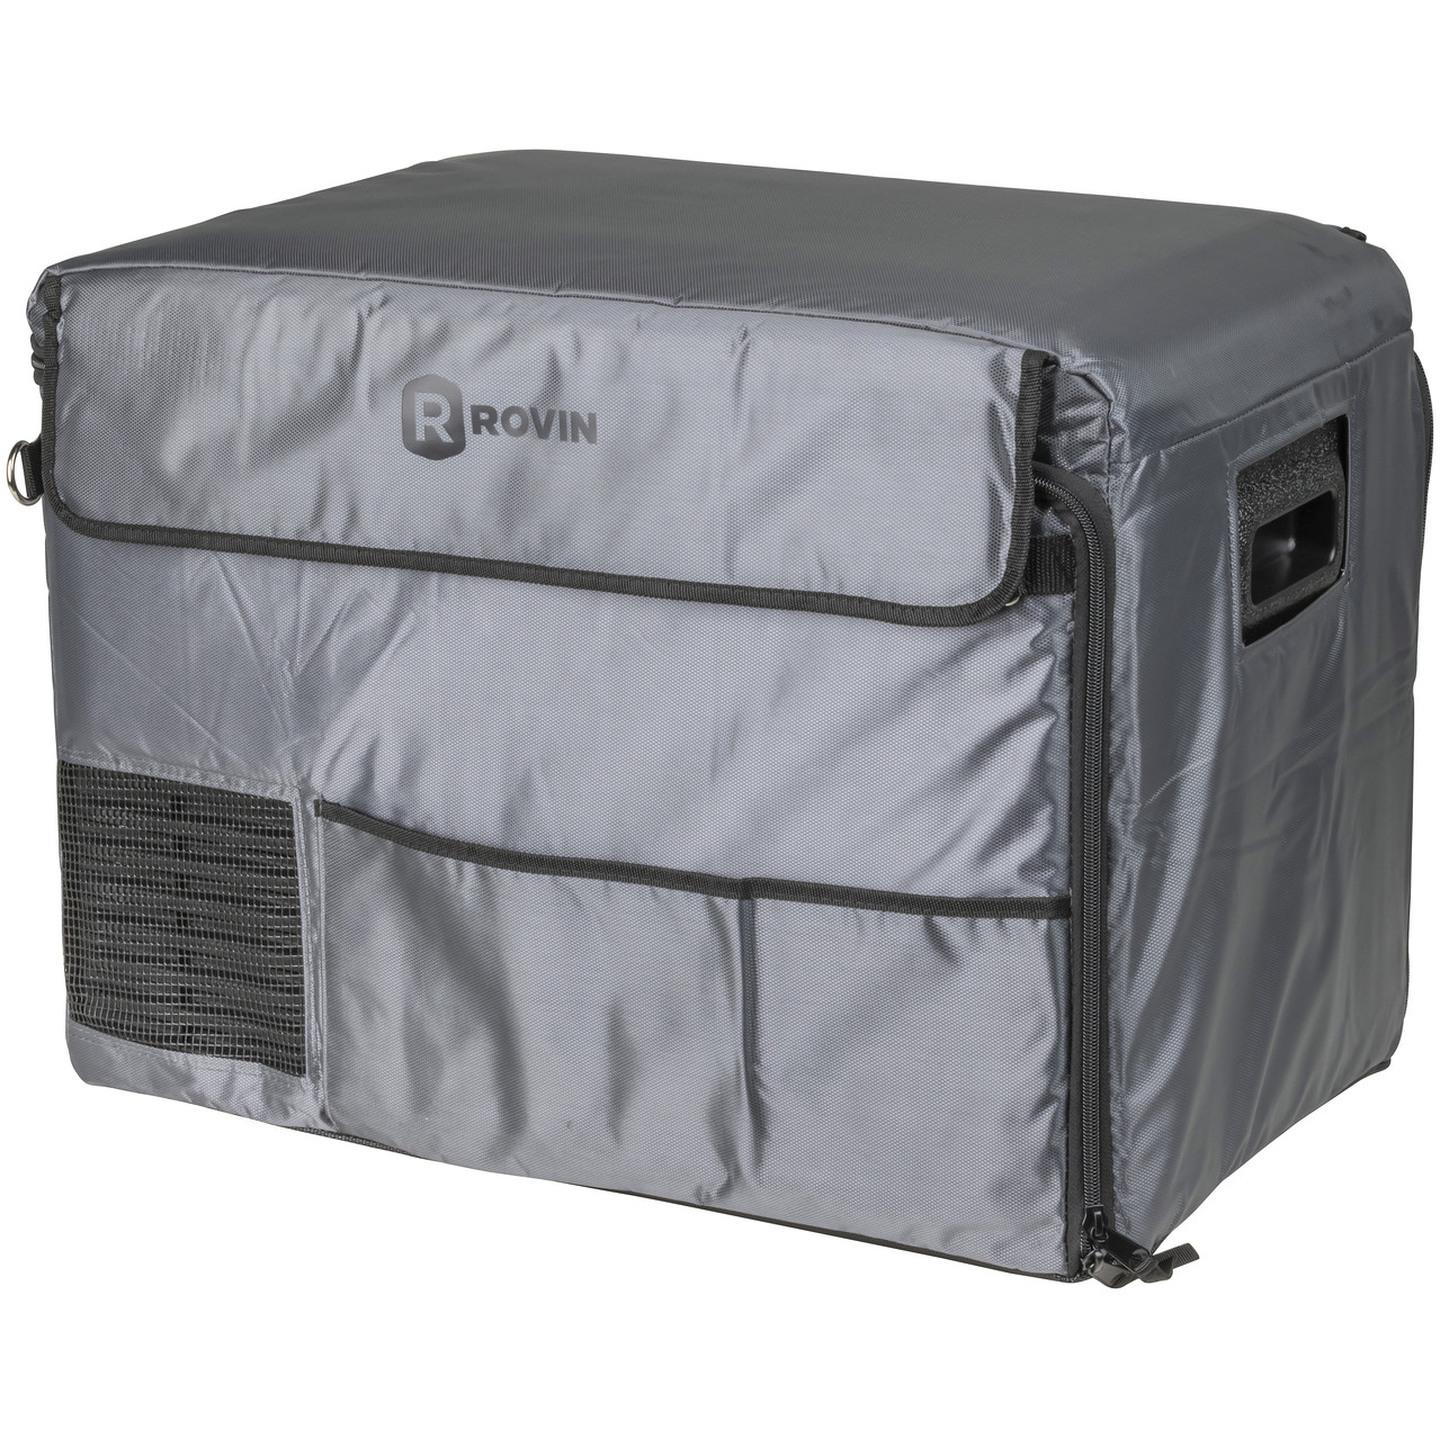 Grey Insulated Cover for 40L Rovin Portable Fridge Freezer